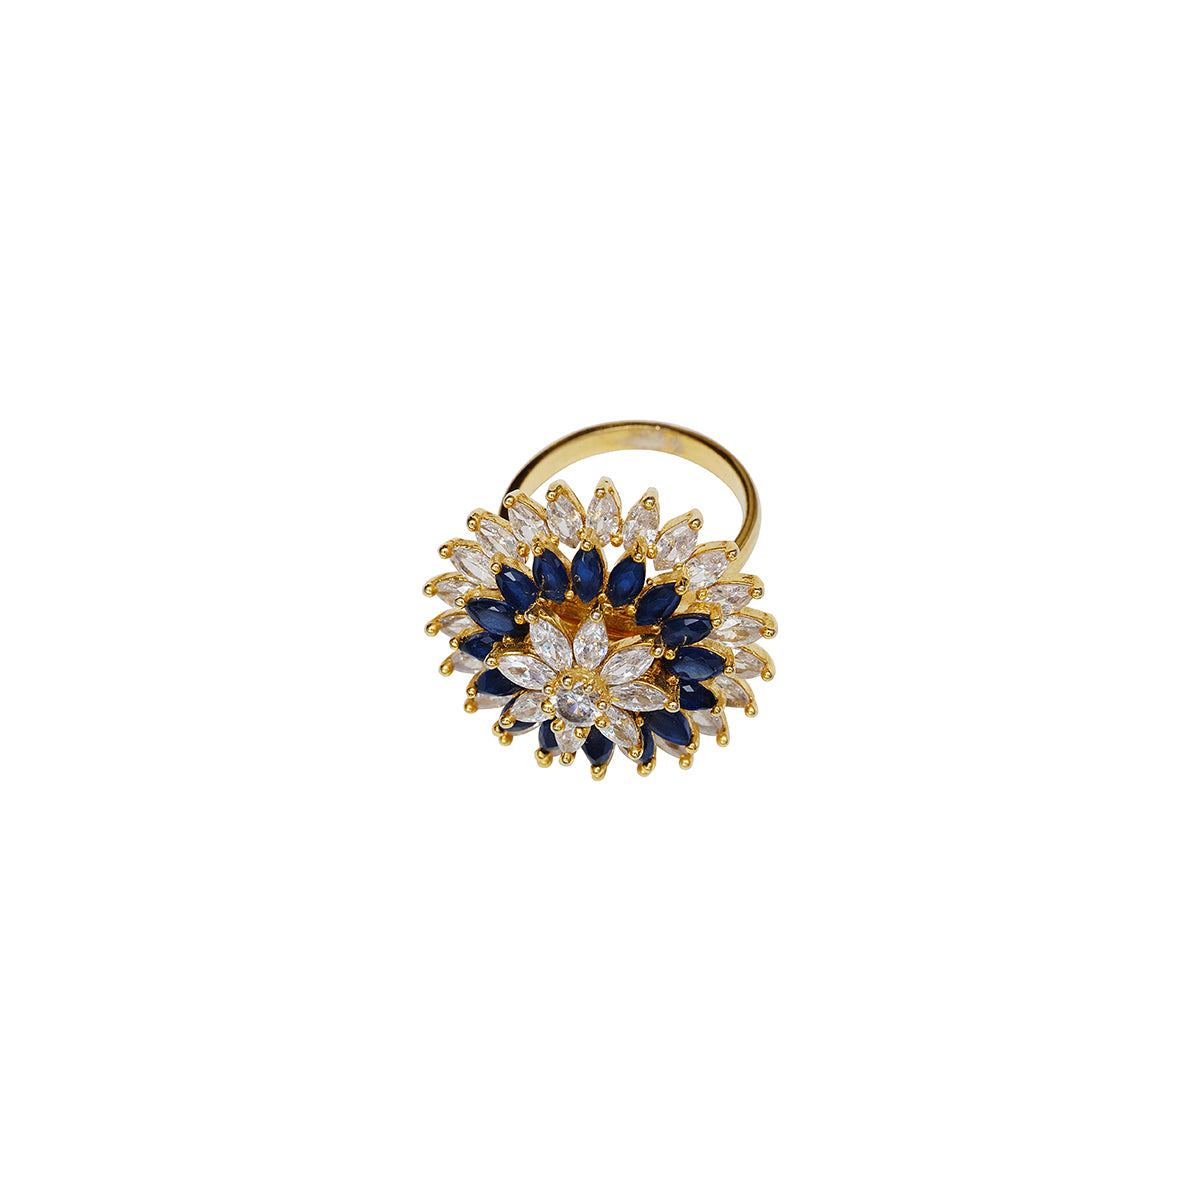 Magai White and blue ring in a floral circular arrangement , three layers of white stones and blue stones mounted on gold. Maheswary collection by Veronica Tharmalingam. As seen in editorials